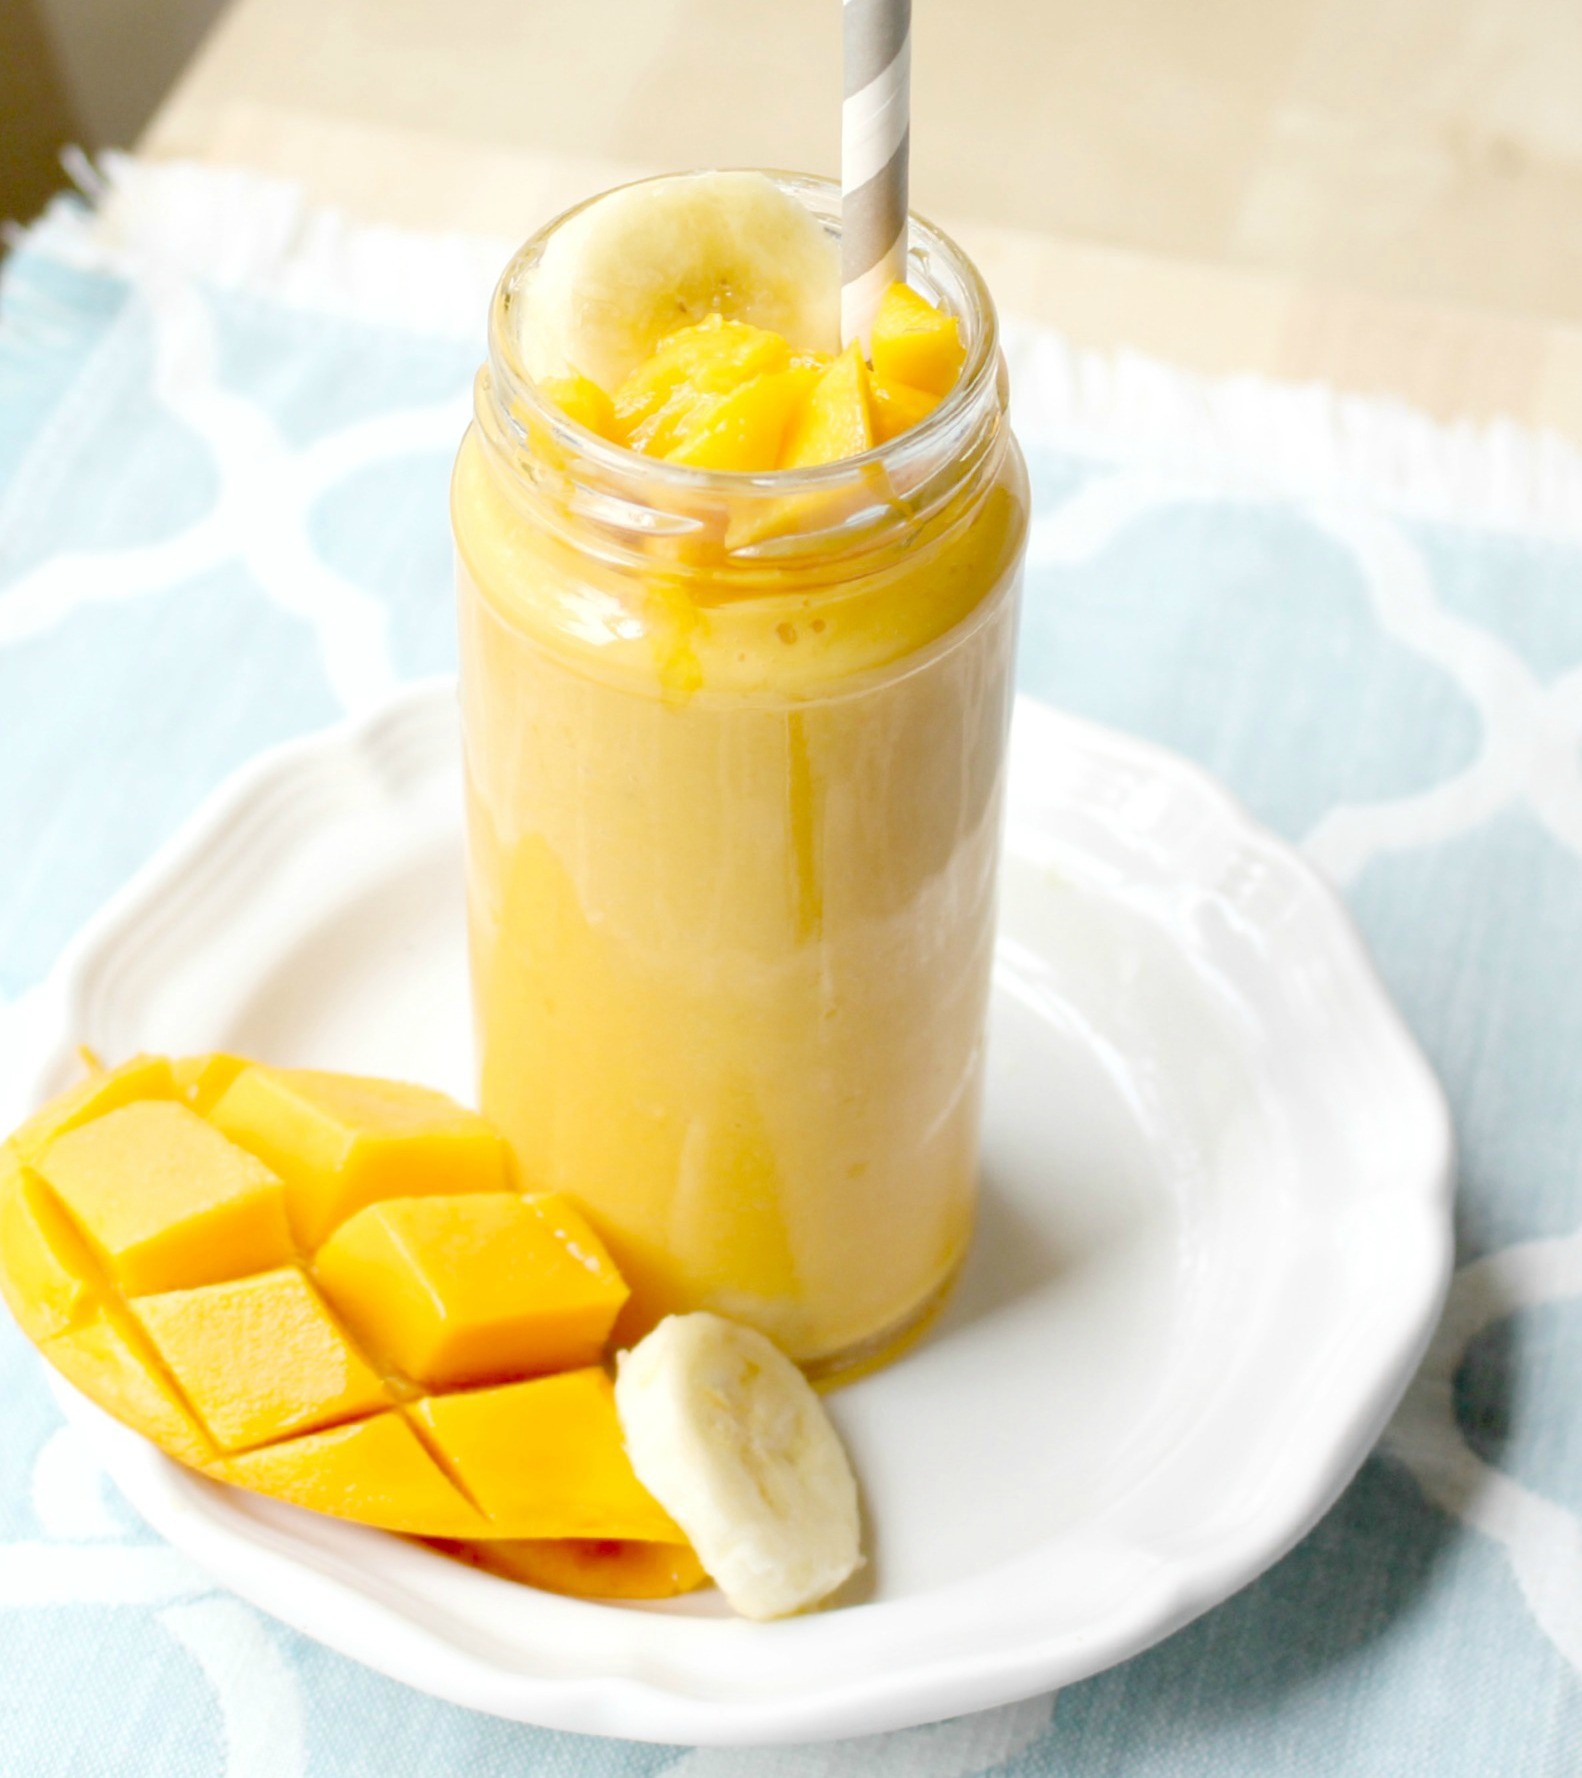 Mango Banana Smoothie - Homemade Nutrition - Nutrition that fits your life